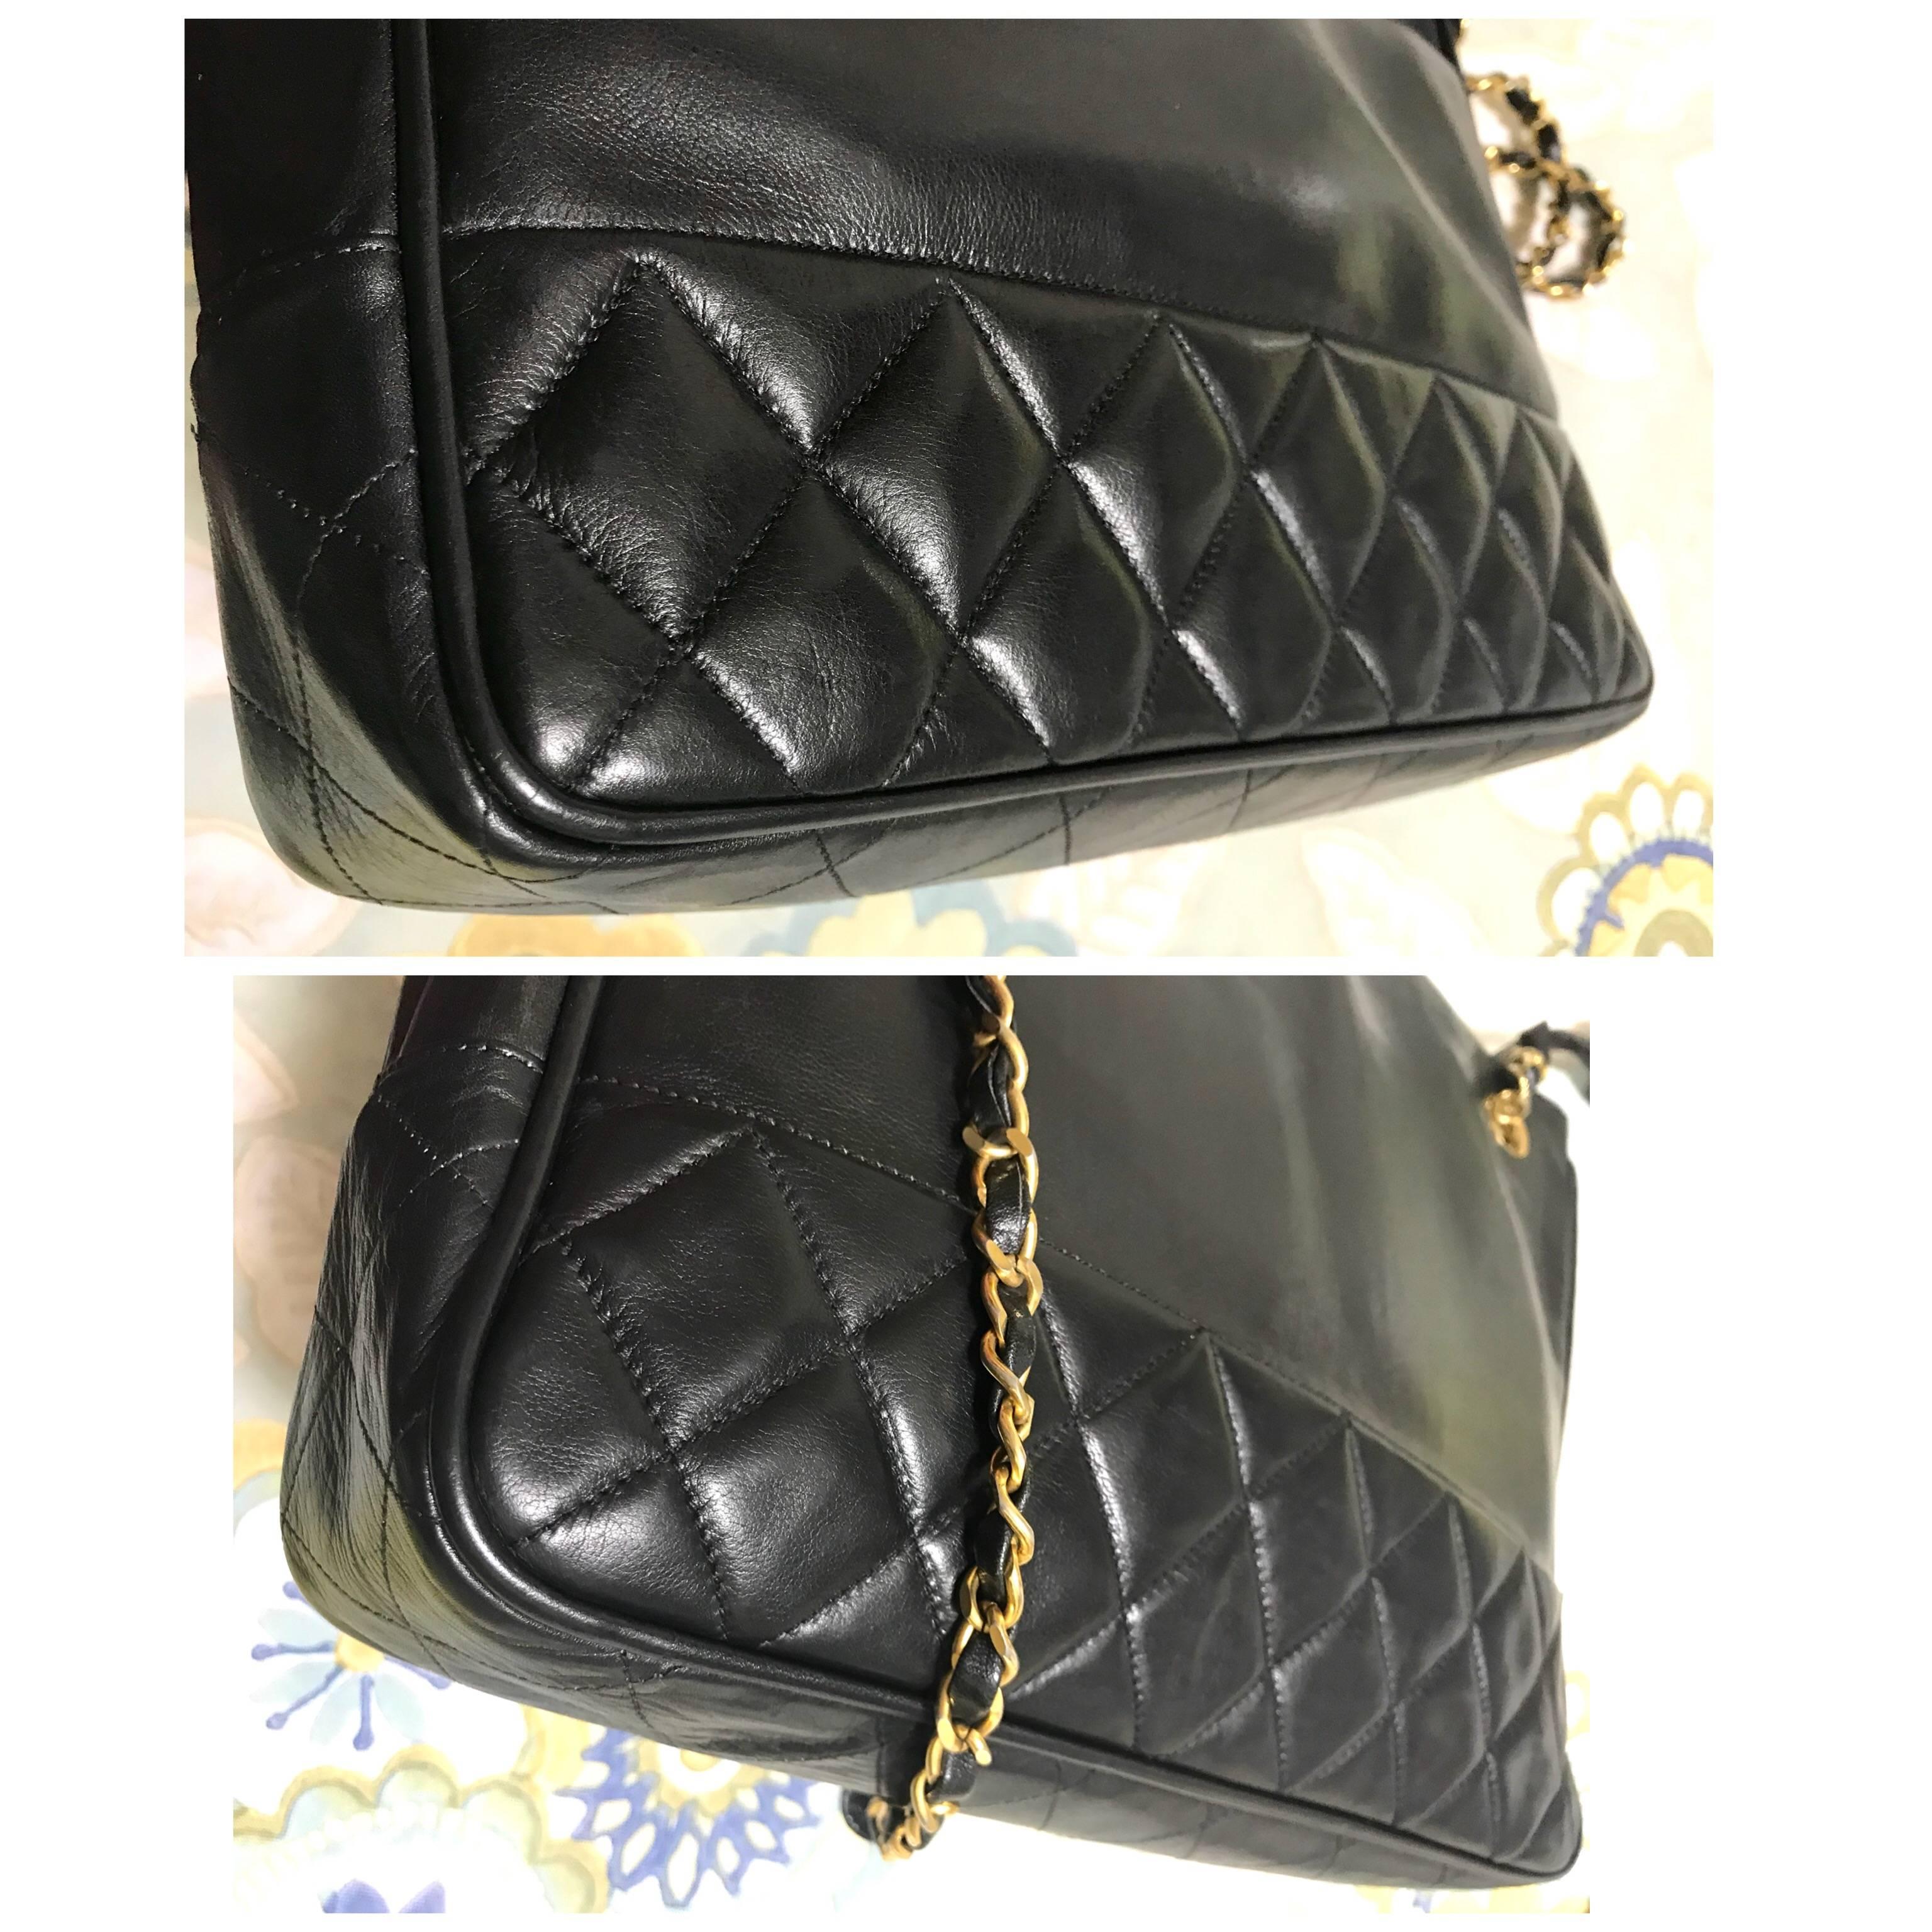 Women's or Men's Vintage CHANEL classic black leather shoulder bag, tote purse with golden chains